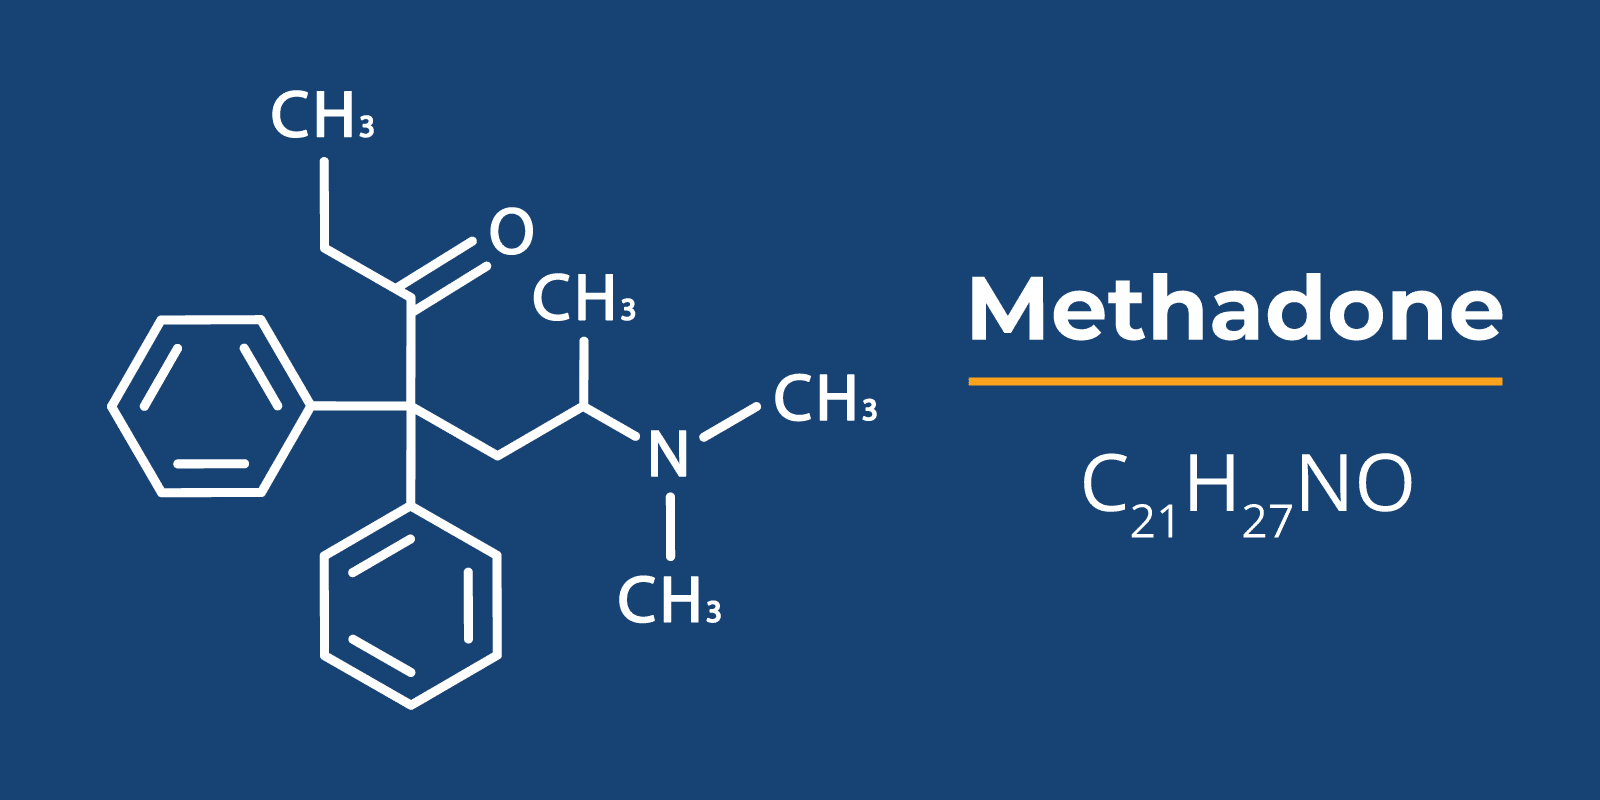 Methadone element symbol on the left with the chemical compound of methadone